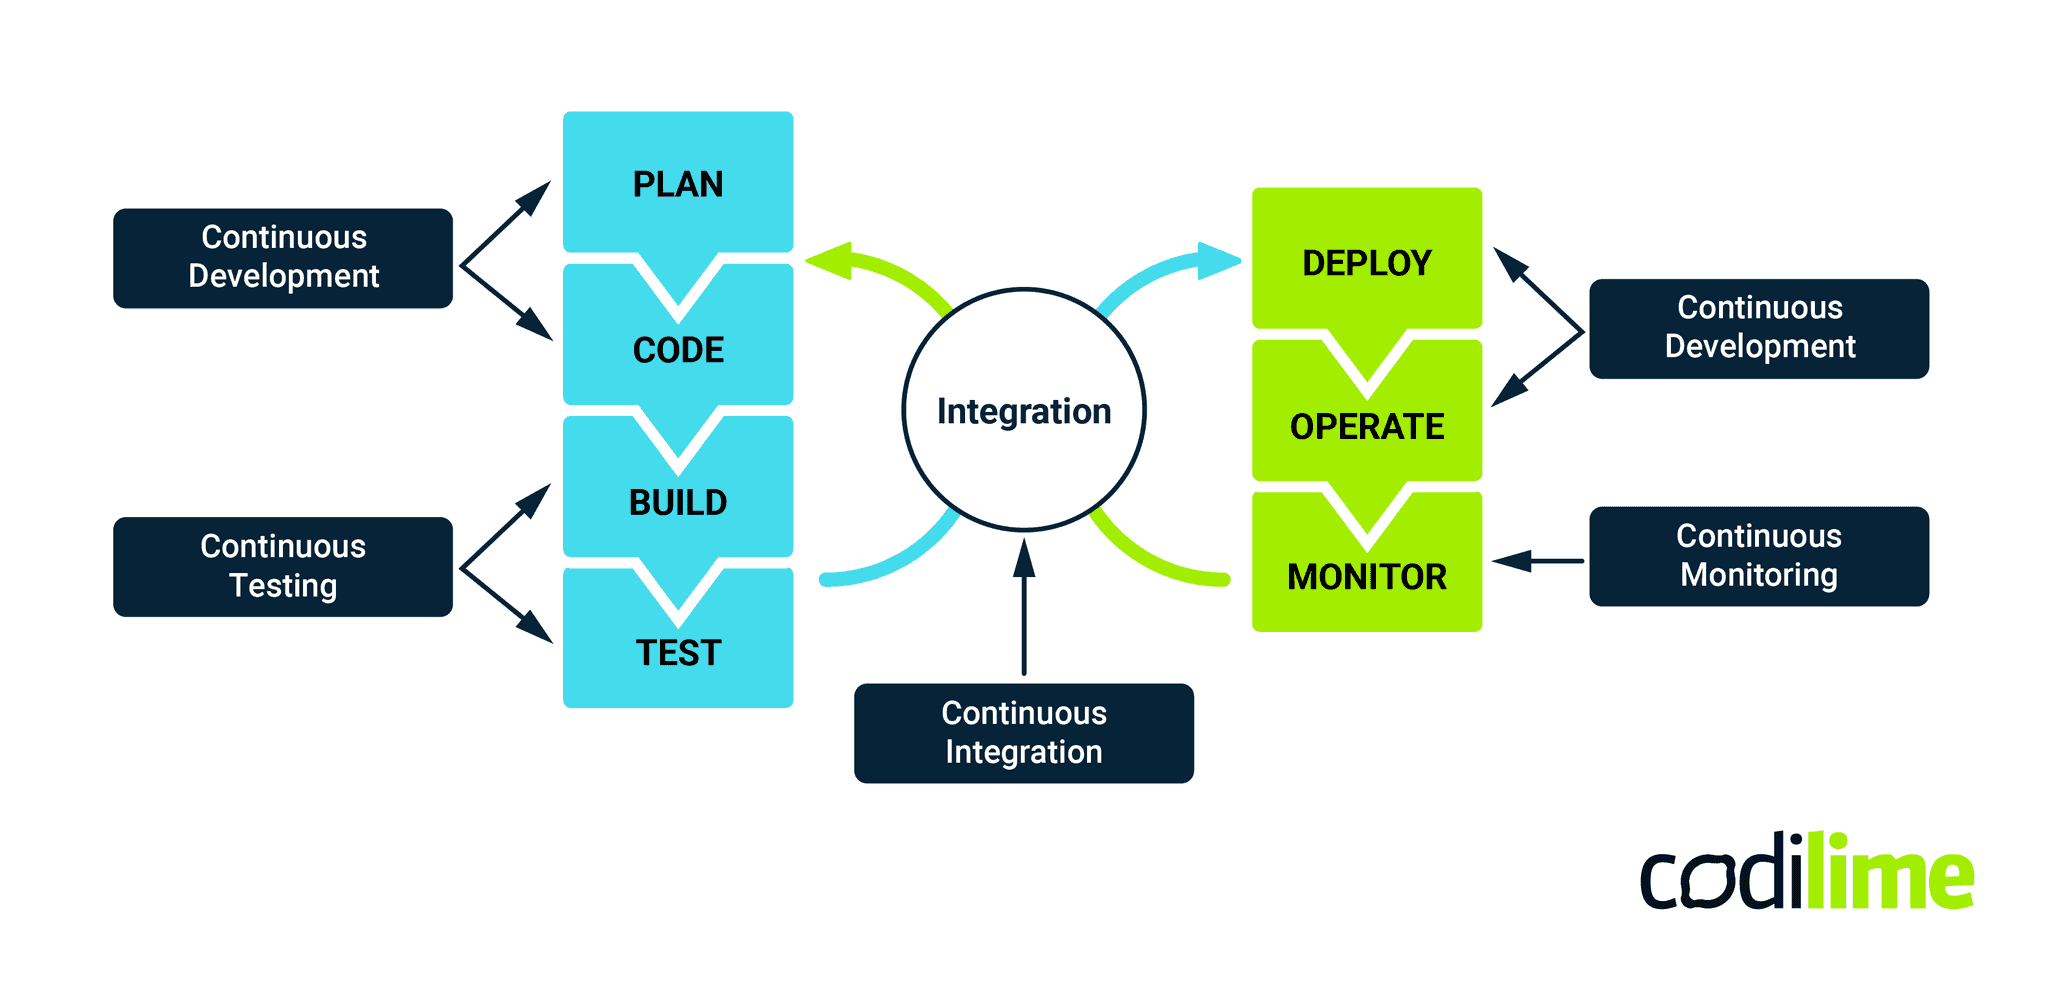 Phases of the DevOps lifecycle